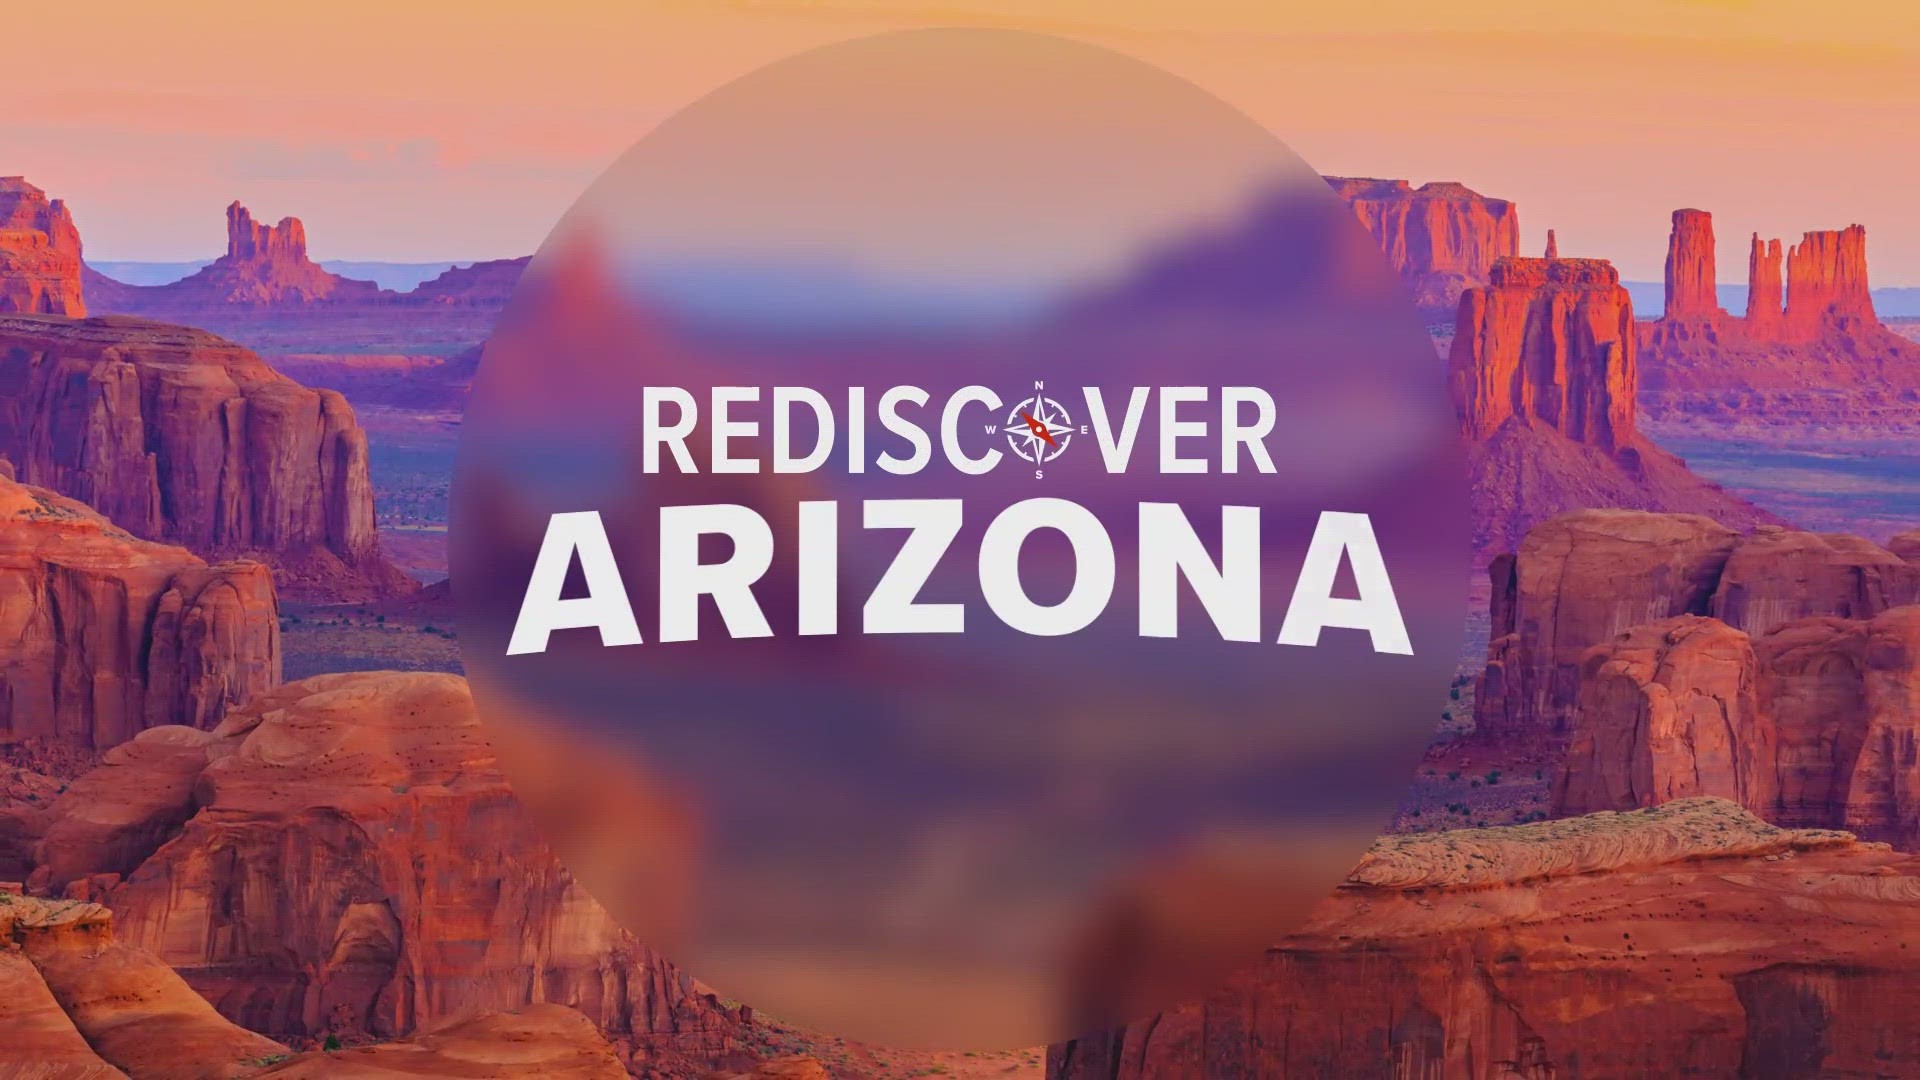 12News journalist Krystle Henderson takes a look at some of the different classes available at the Mesa Arts Center in the latest edition of Rediscover Arizona